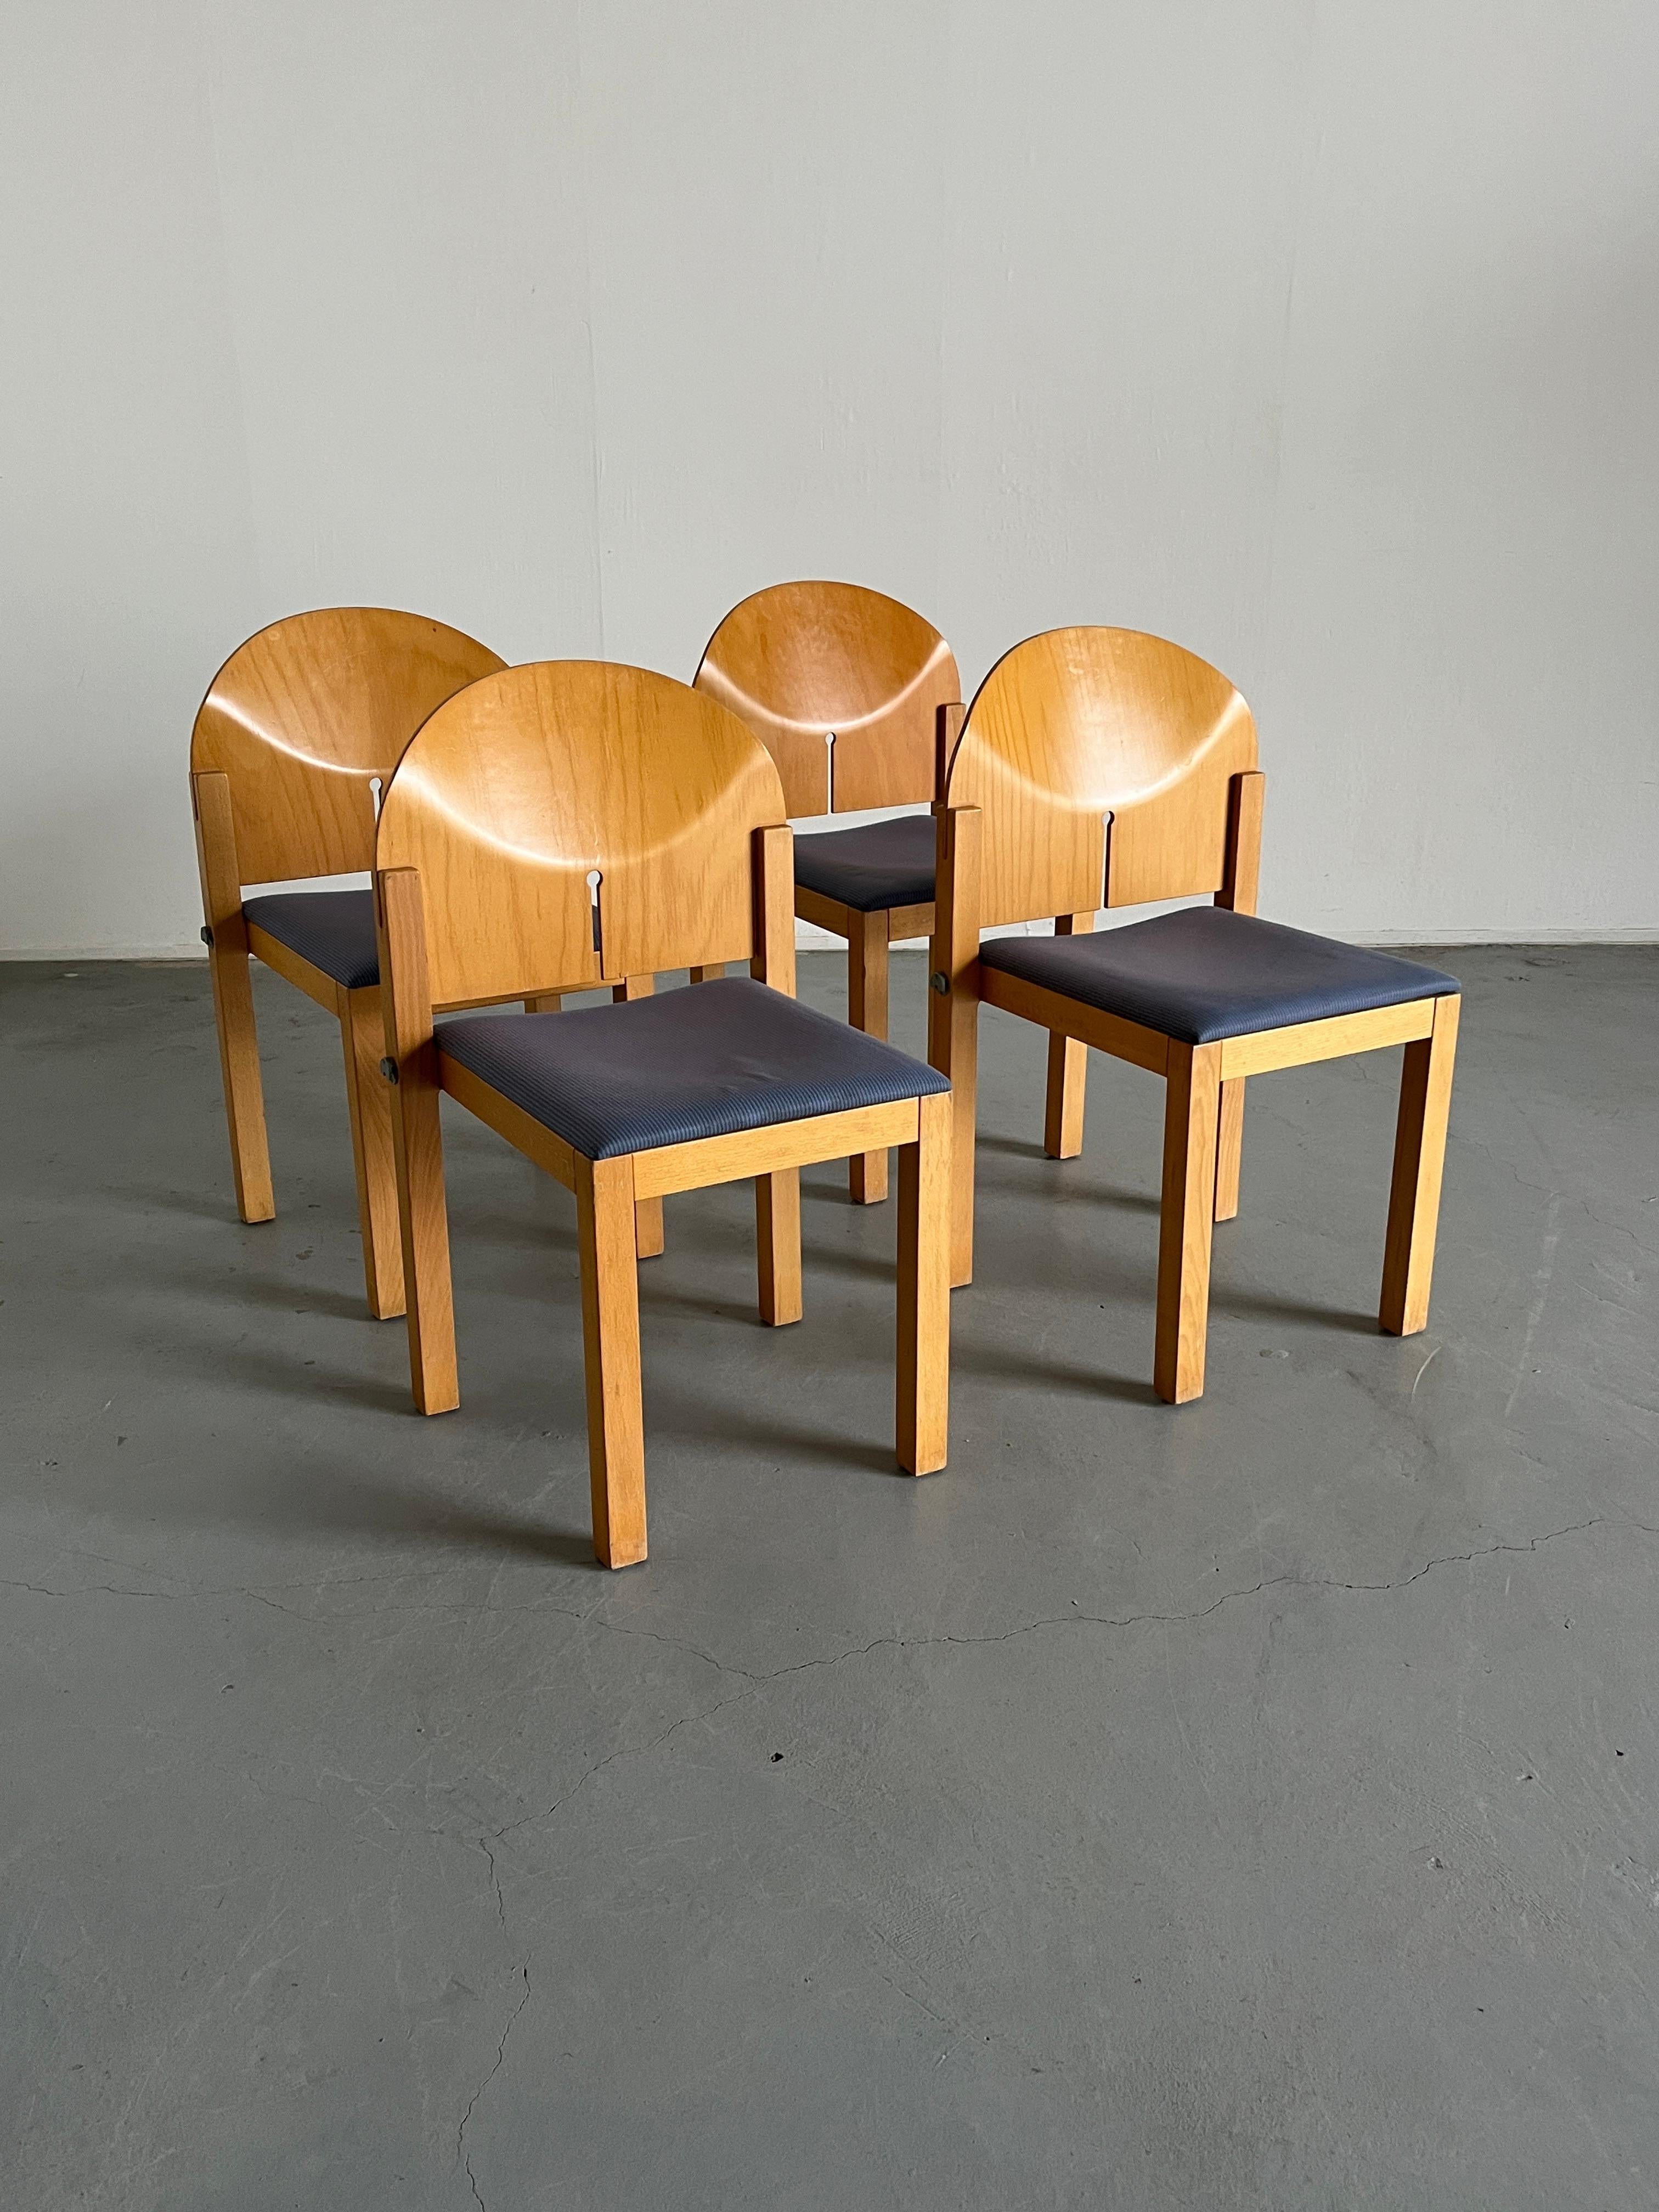 Set of four beautiful postmodern dining chairs from the 1980s by Arno Votteler for Bisterfeld and Weiss.
High production quality.
Reminiscent of the designs of Afra and Tobia Scarpa for B&B Italia in the 1970s.
Can be connected to form a seating